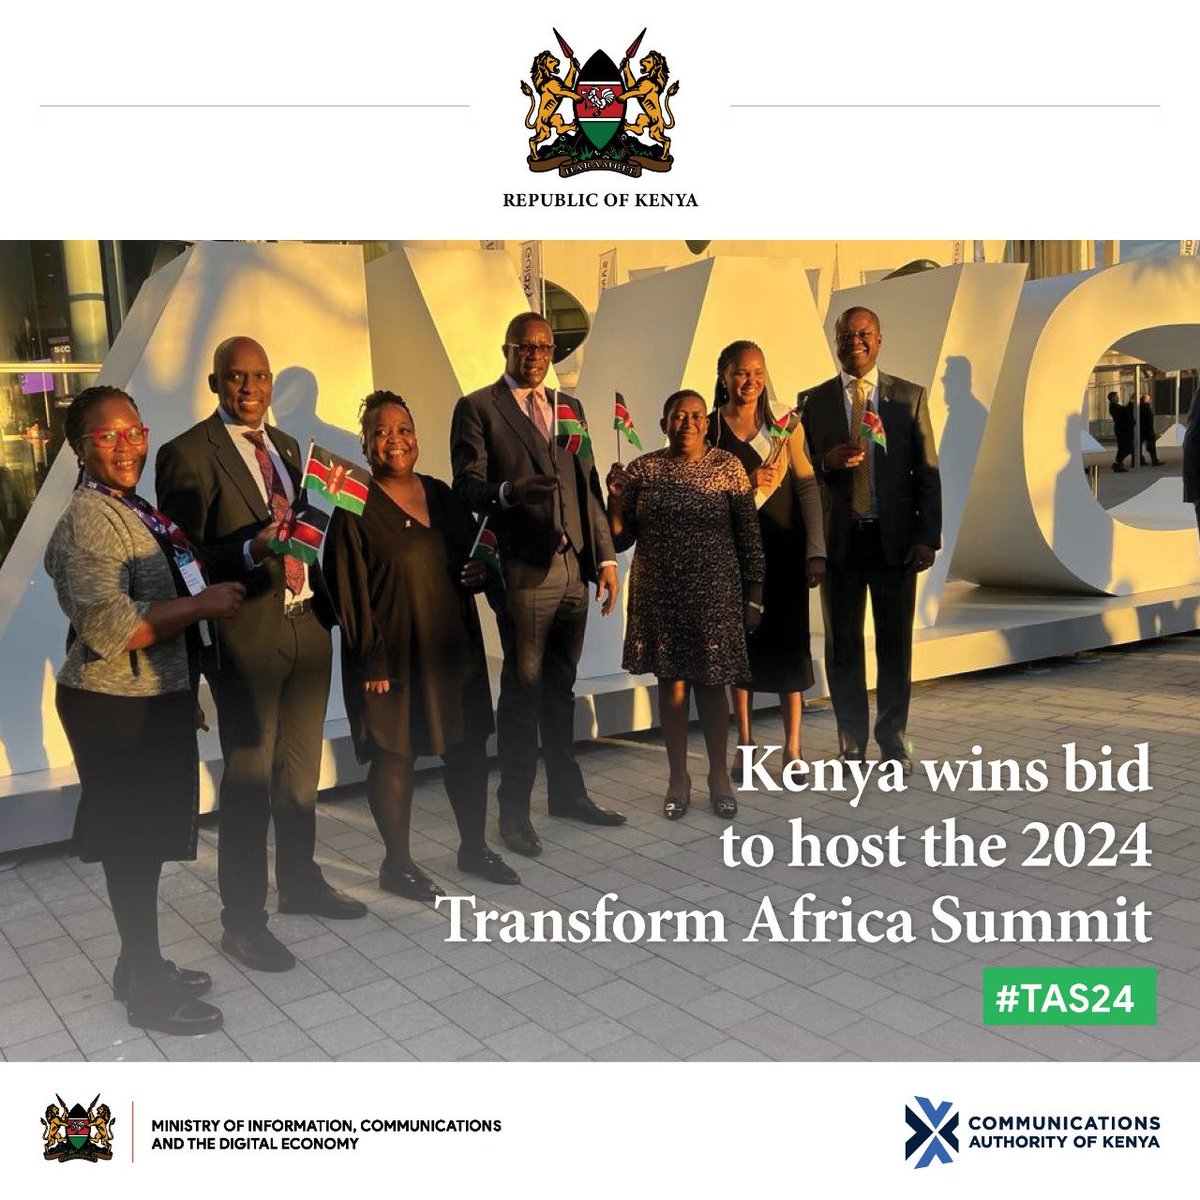 Kenya winning the bid to host the prestigious Transform Africa Summit 2024 back in February was a monumental achievement that positions us as a frontrunner in Africa's ICT sector, attracting investments & fostering partnerships on a global scale @CA_Kenya @ICTAuthorityKE #TAS24